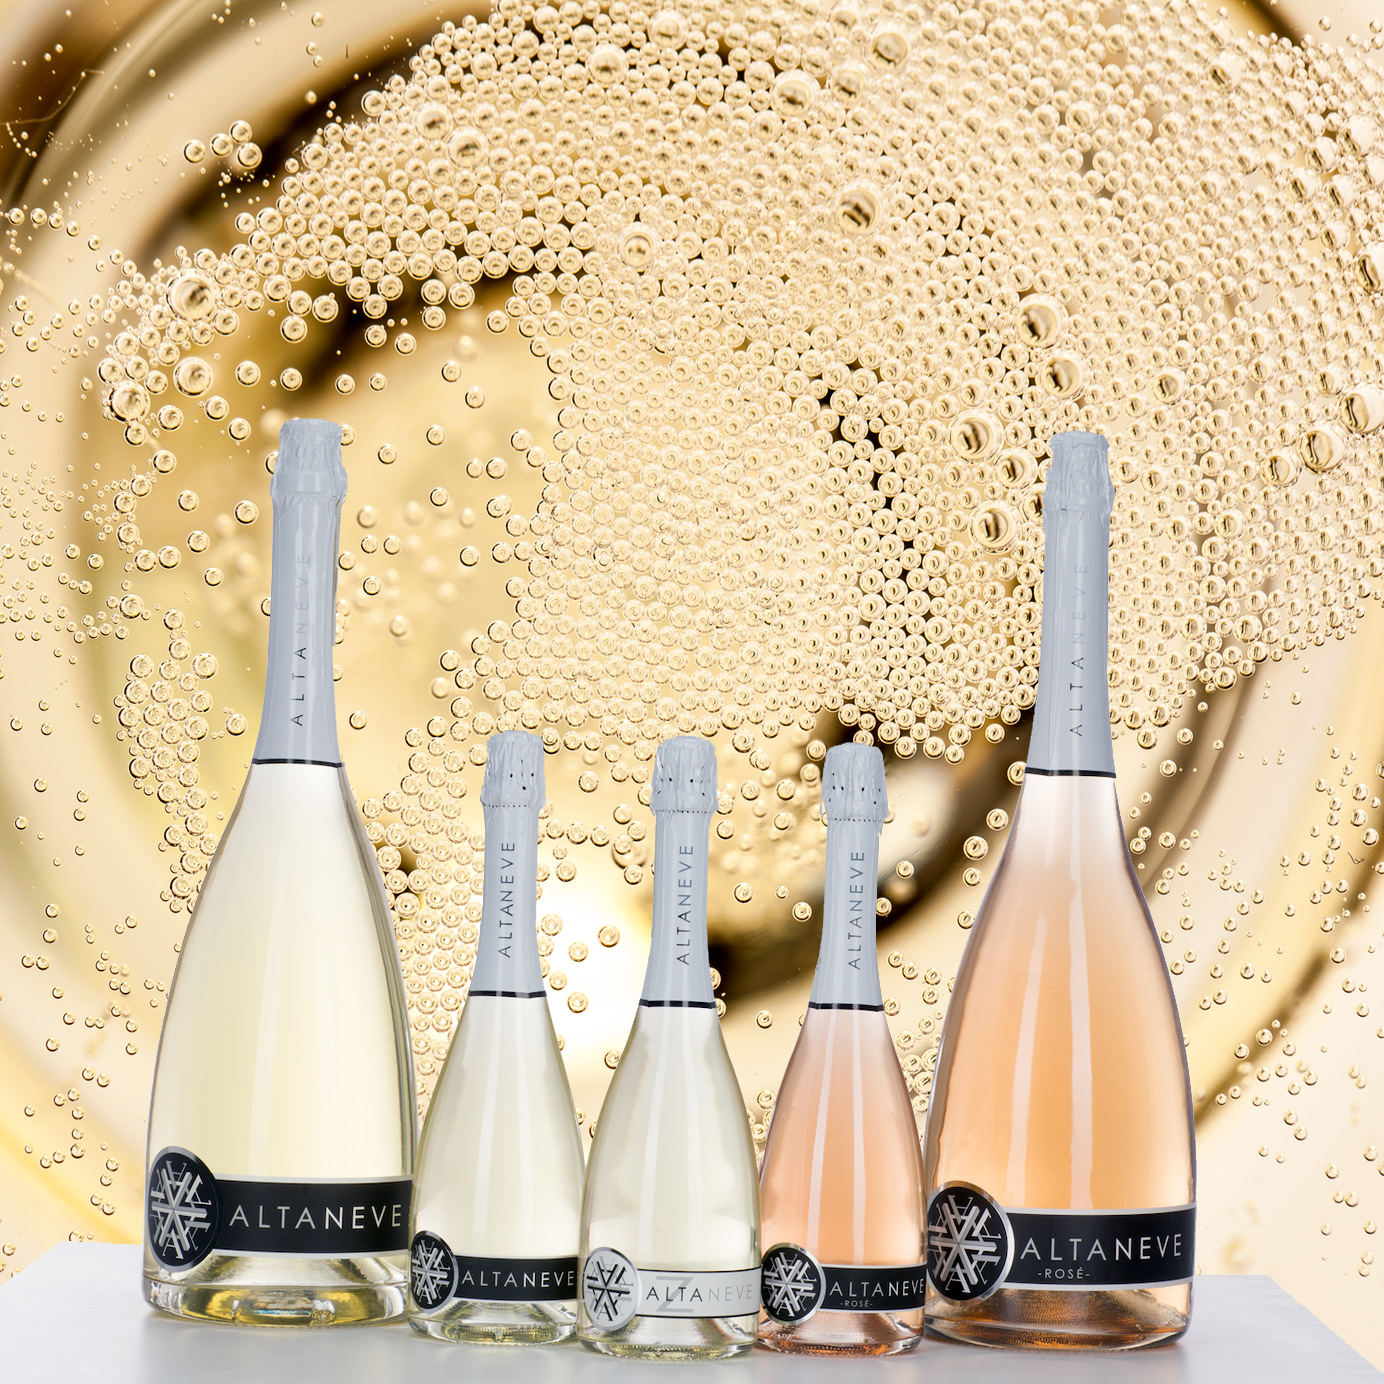 Prosecco Is Making Moves With Big Bottles and Champagne-Style Flash